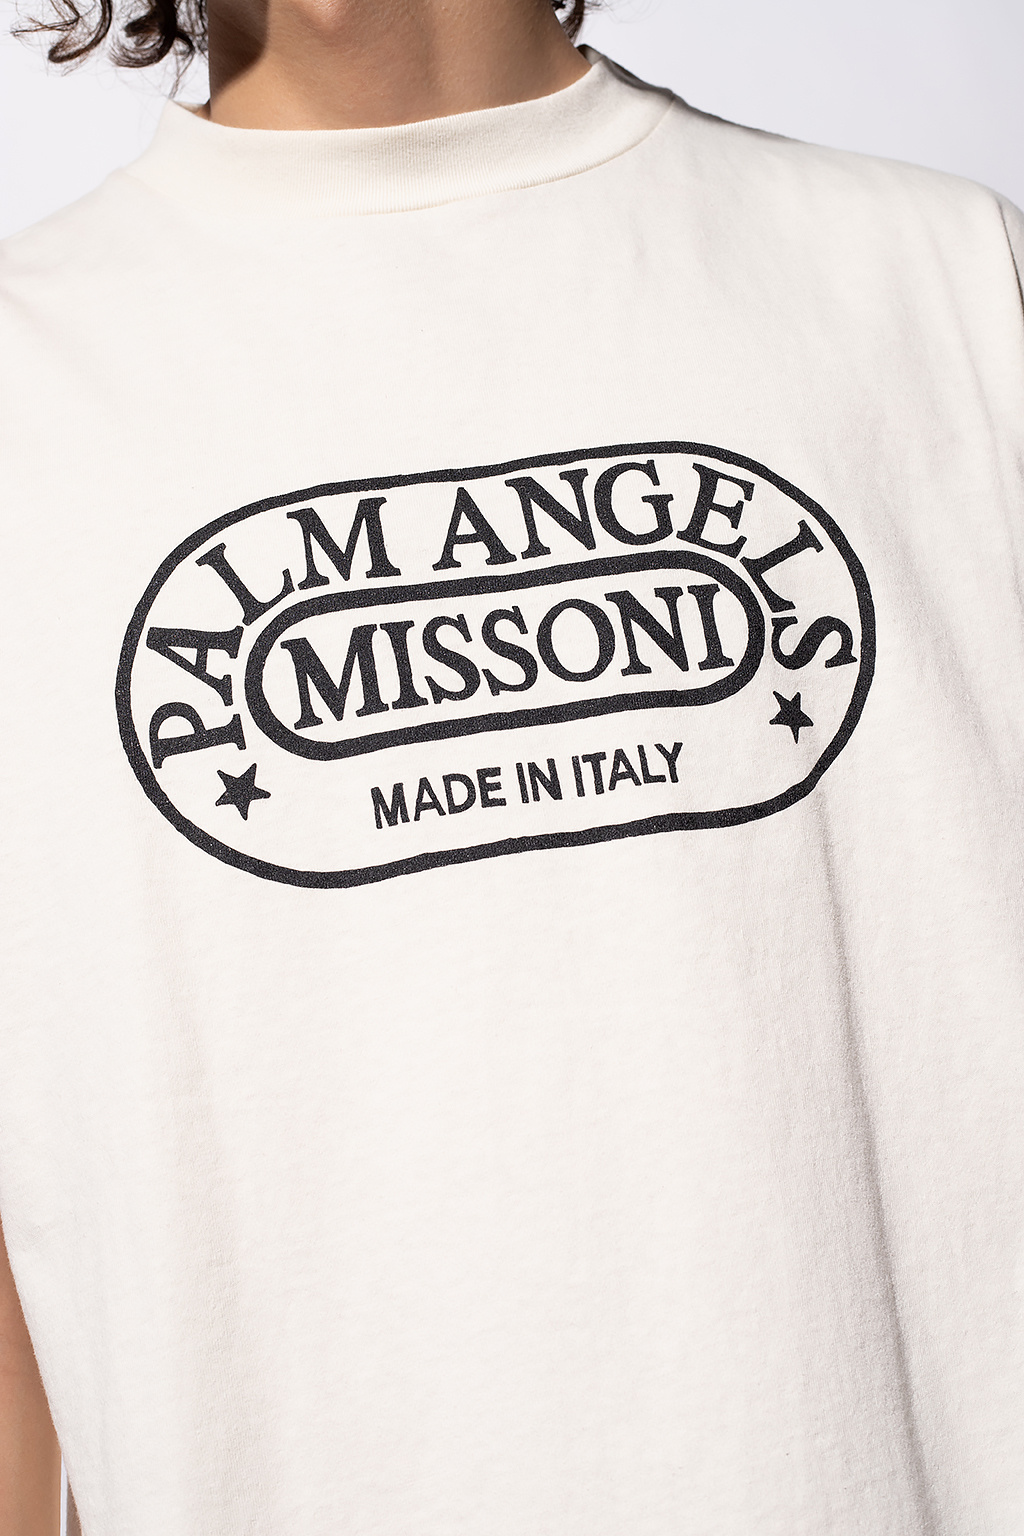 Luxury T-Shirt for men - White T-Shirt Palm Angels x Missoni with tasks